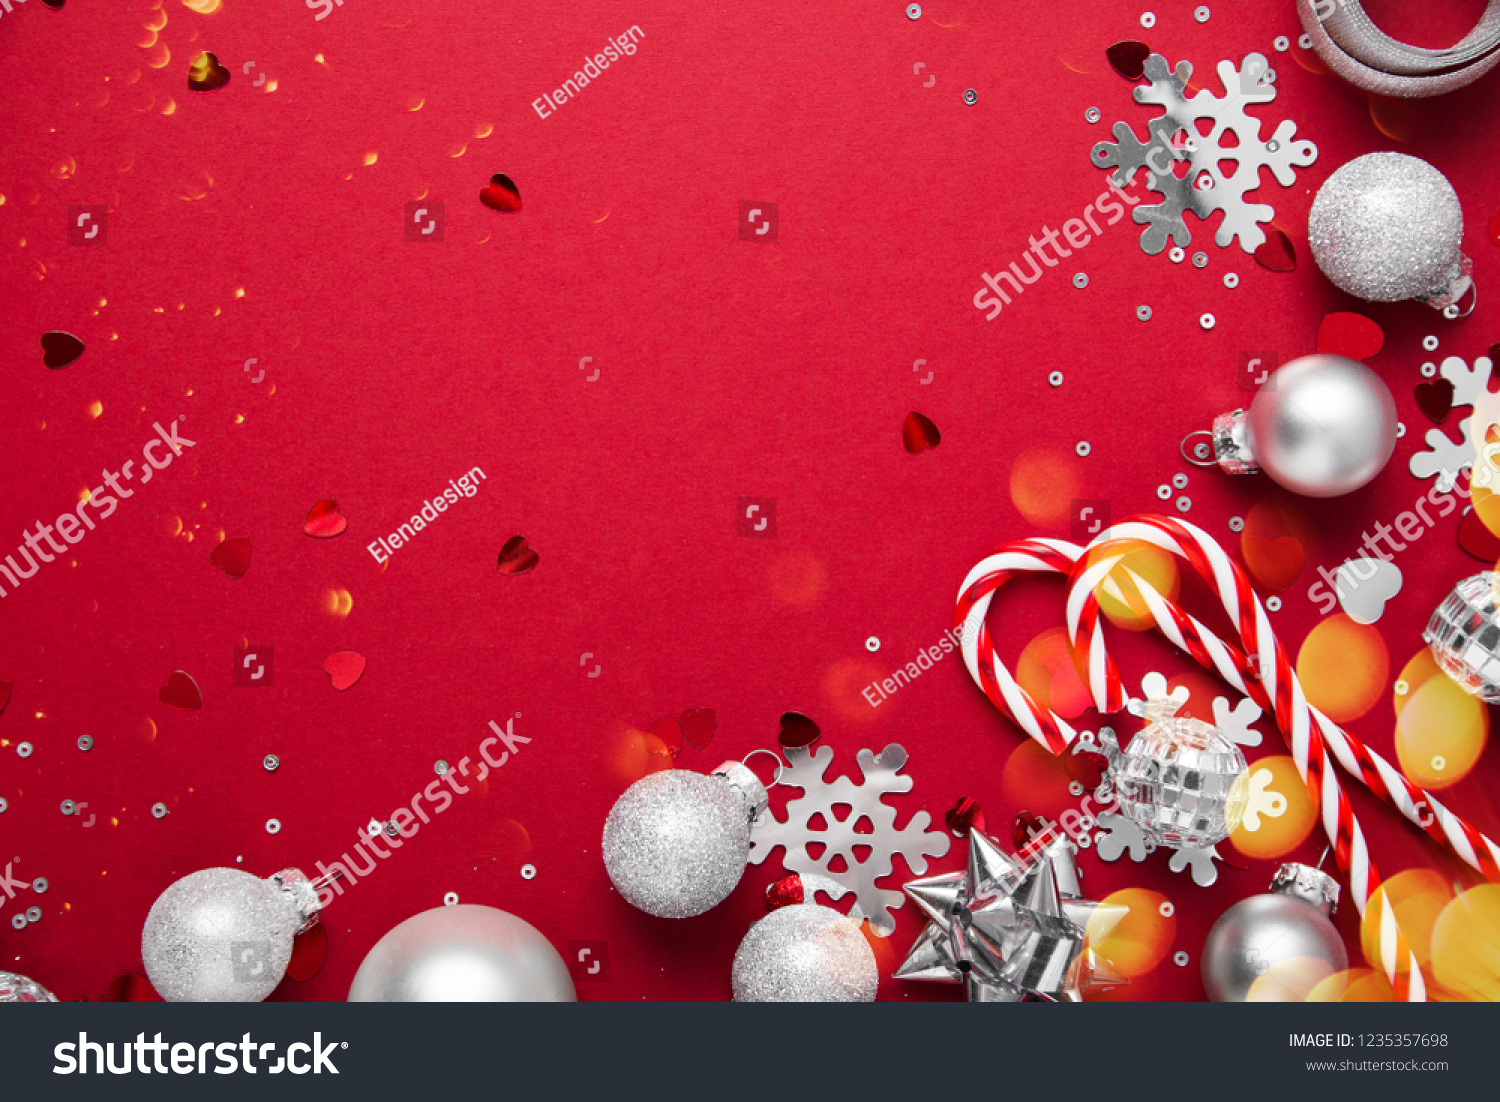 Merry Christmas and Happy Holidays greeting card, frame, banner. New Year. Noel. Christmas white and silver ornaments on red background top view. Winter holiday xmas theme. Flat lay. #1235357698